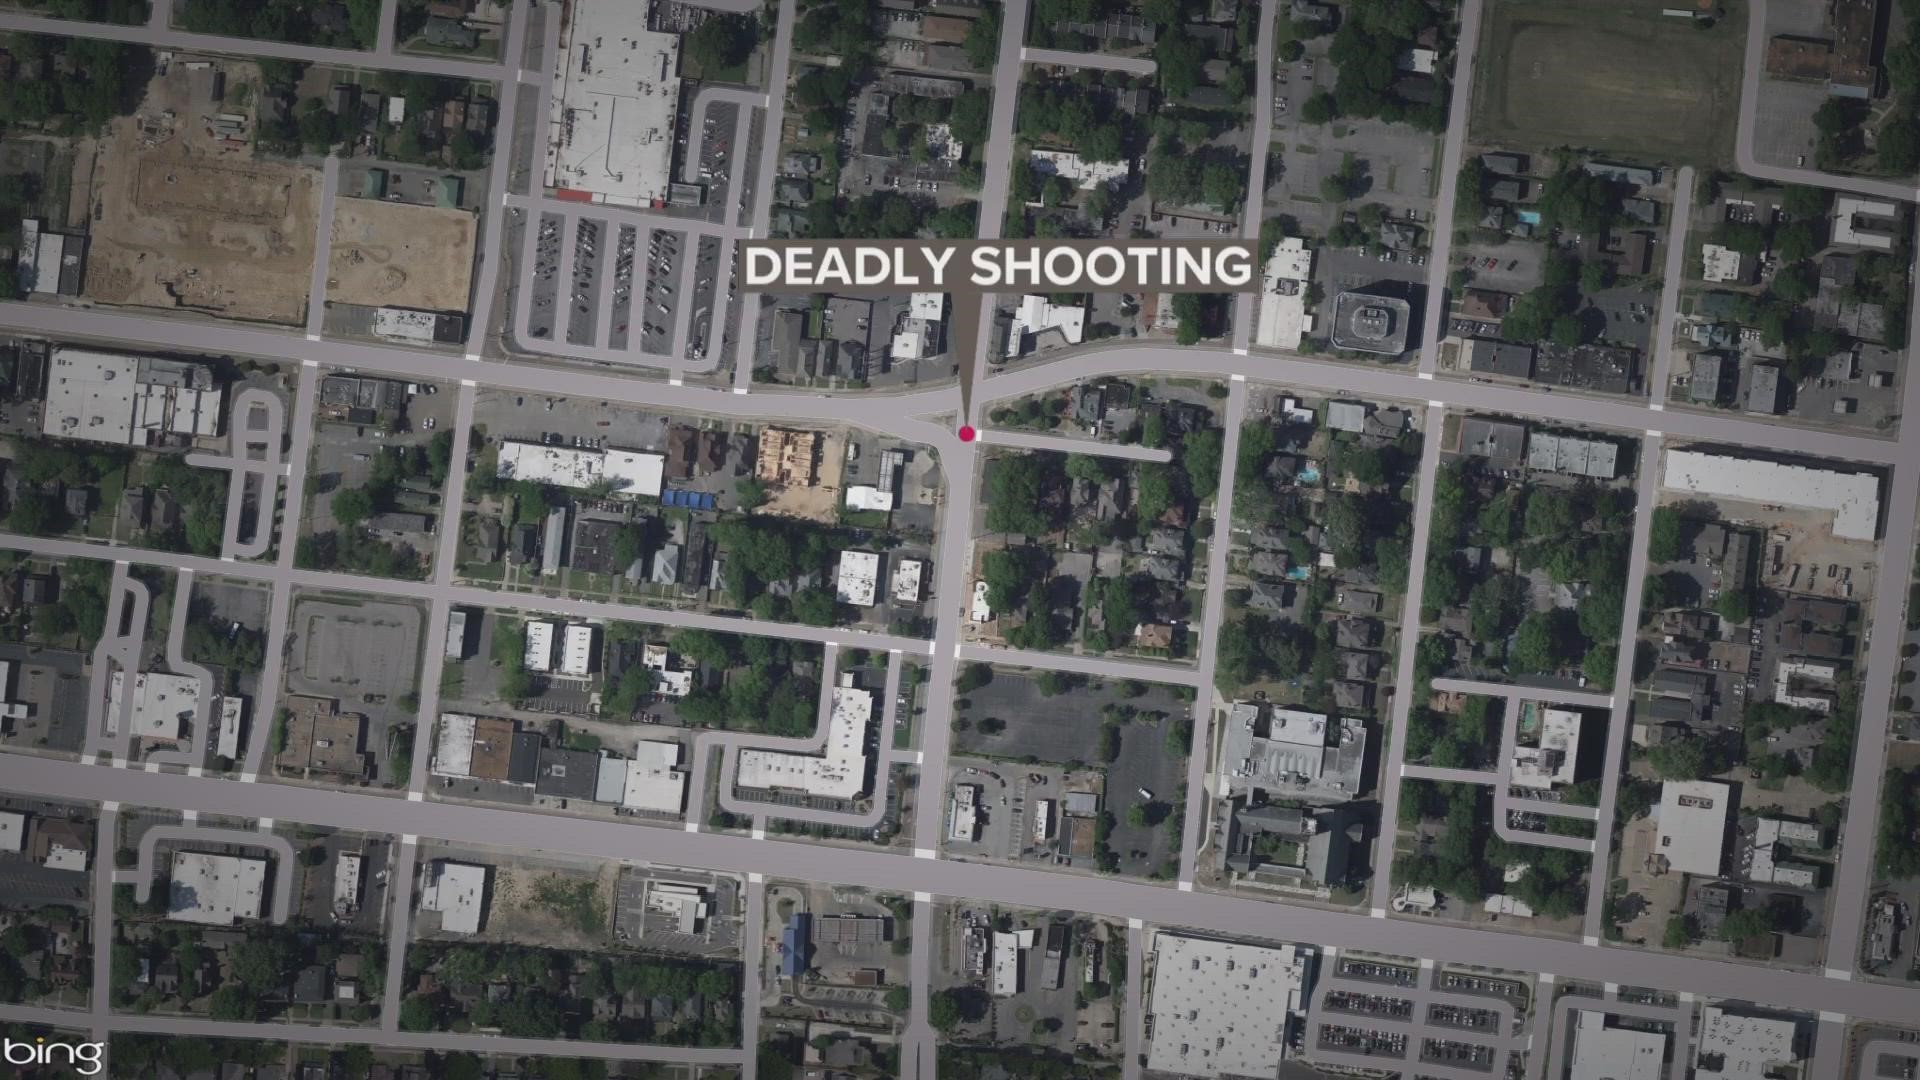 MPD said a shooting took place on Saturday near Lockett and Belvedere — not far from Zinnie's and Lampligher Lounge.